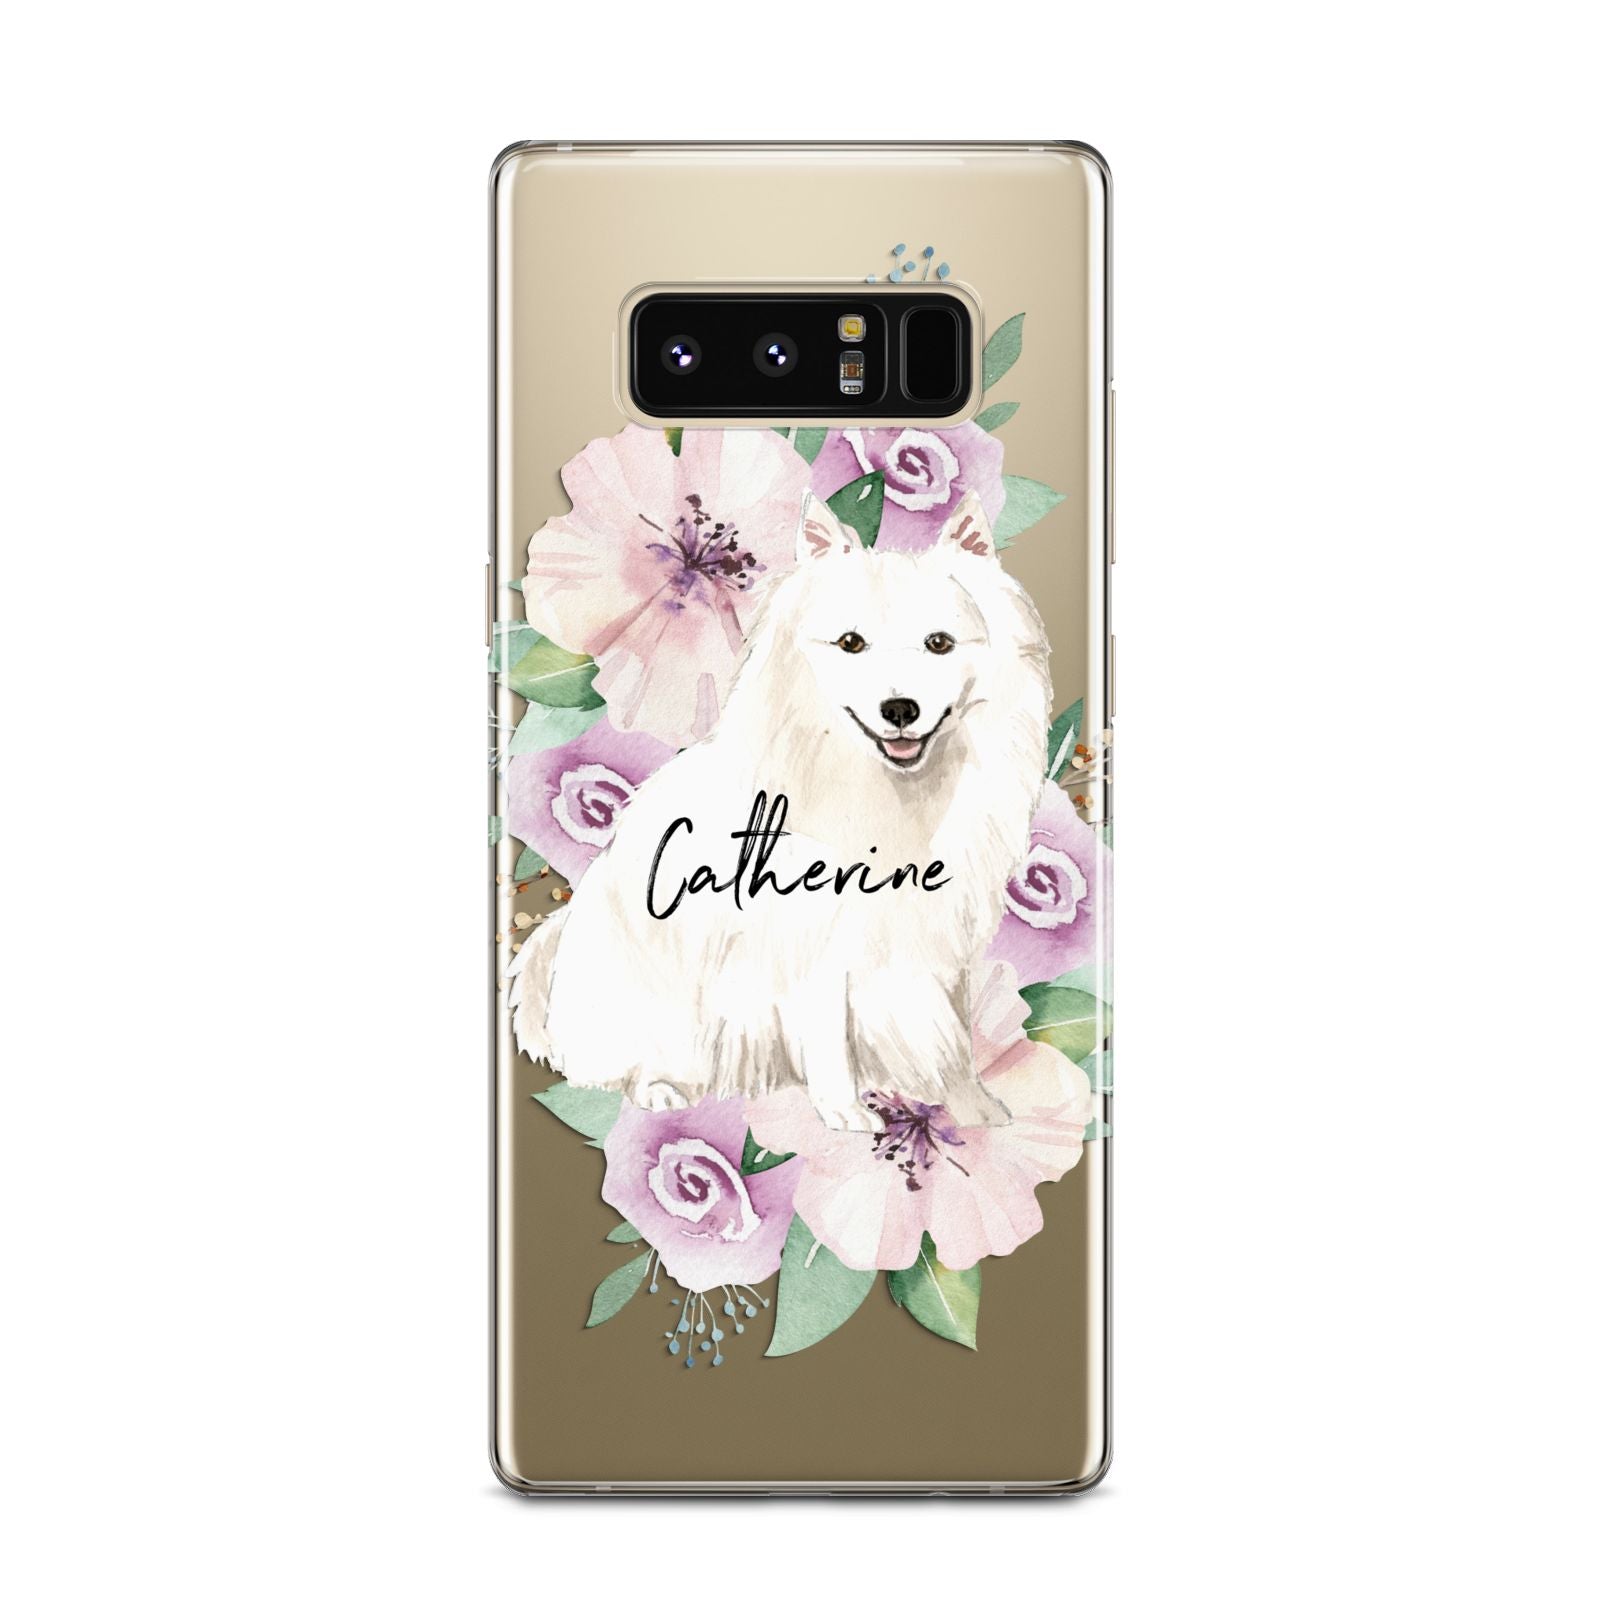 Personalised Japanese Spitz Samsung Galaxy Note 8 Case